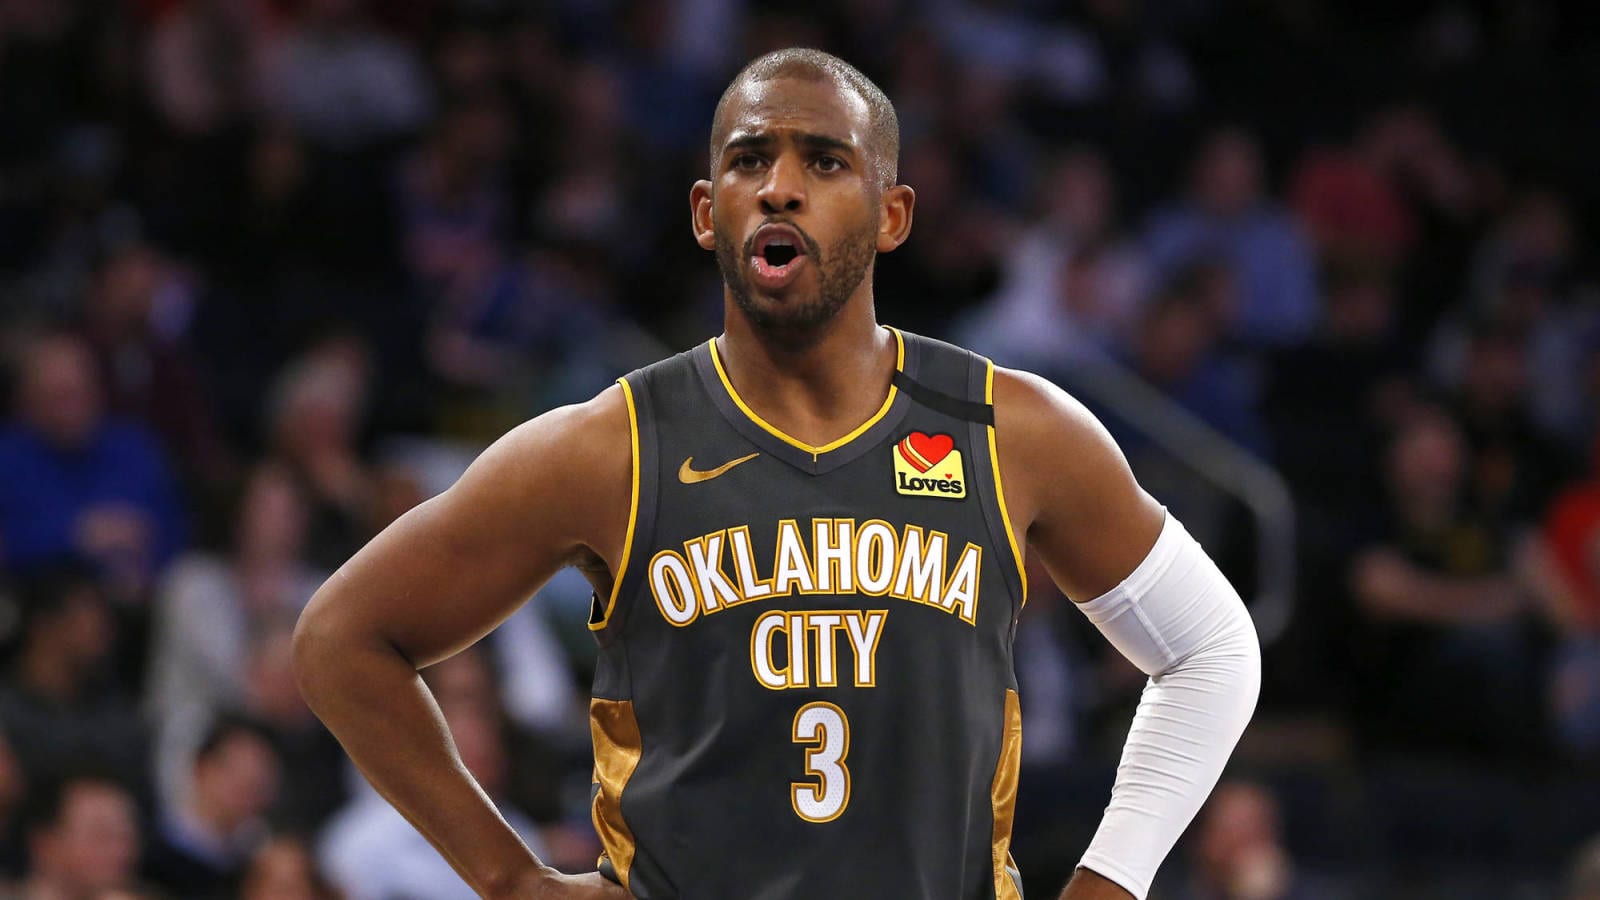 Chris Paul Producing HBO Documentary ‘The Day Sports Stood Still’